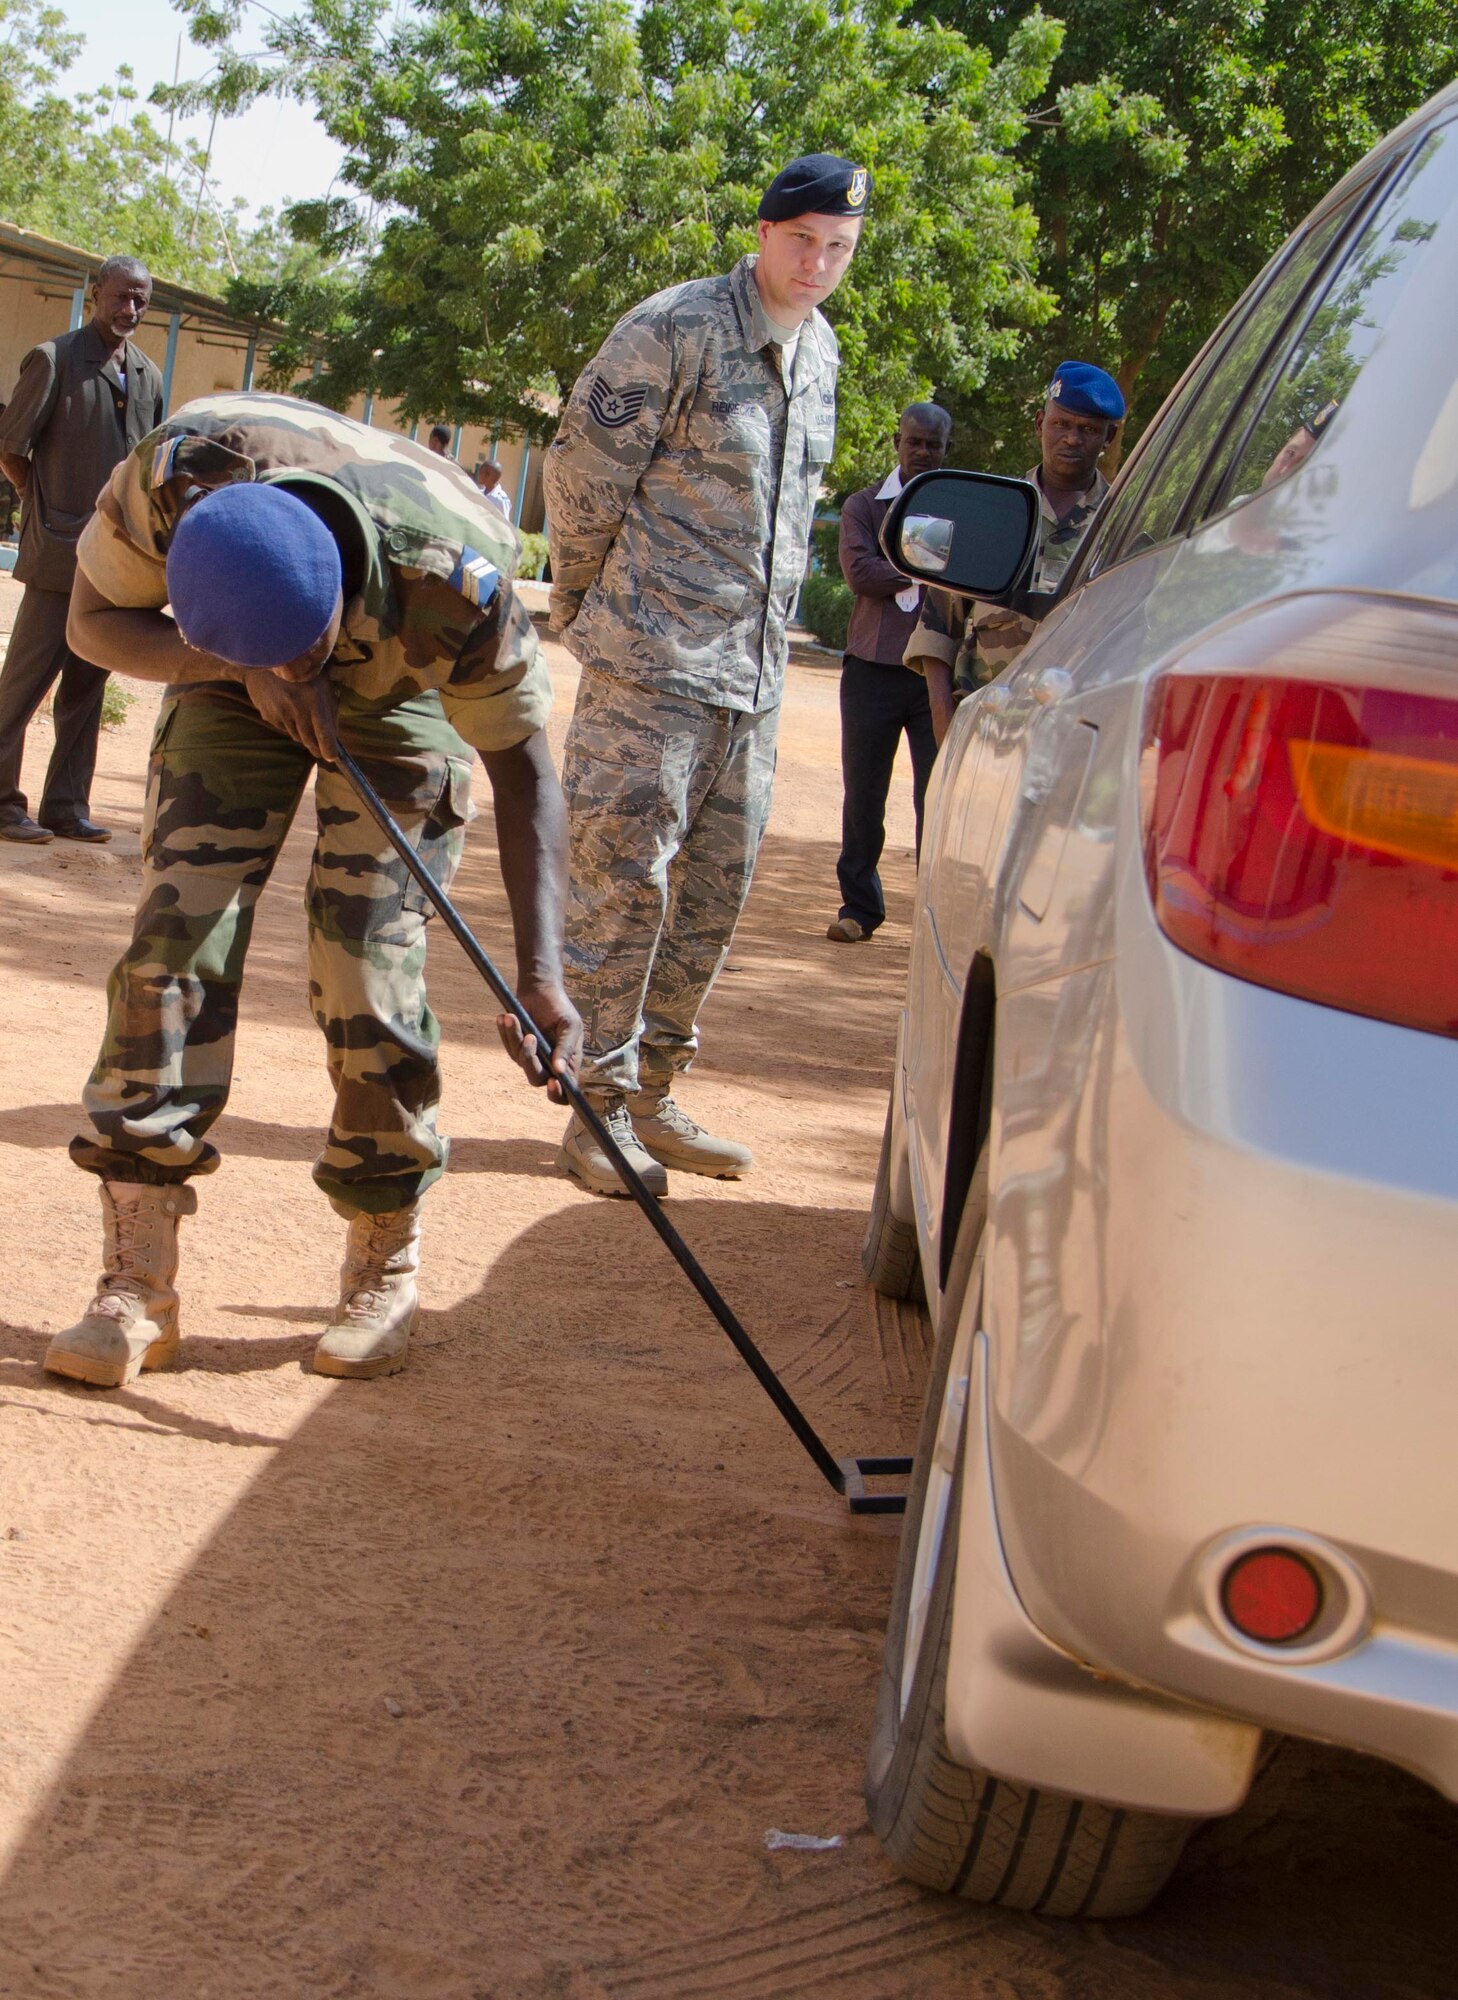 NIAMEY, Republic of Niger -- Tech. Sgt. Mark Reinecke, 818th Mobility Support Advisory Squadron air advisor, conducts vehicle search training with Sgt. Hamadou Amadou, Niger National Flight at Airbase 101, Niamey, Niger, Nov. 6, 2013. The 818 MSAS sent a seven Airmen logistics management assistance team to provide a complete air mobility/logistics expertise package that was tailored to fit the needs of its partner nation. The program helps develop the partner nation's ability to conduct air mobility operations through technical courses and achieve self sufficiency. (U.S. Air Force photo by Maj. Sean Hook)